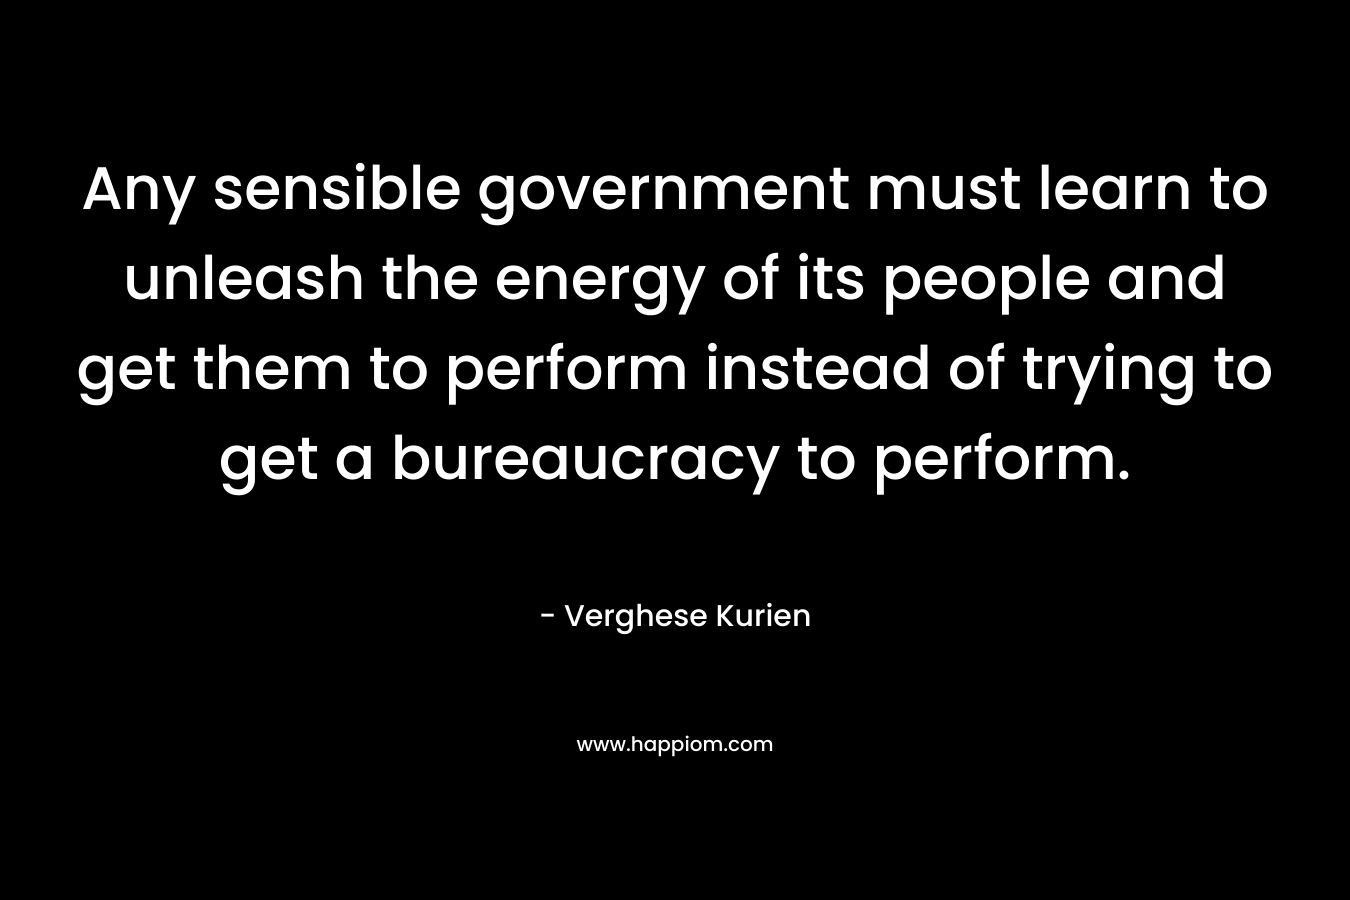 Any sensible government must learn to unleash the energy of its people and get them to perform instead of trying to get a bureaucracy to perform.